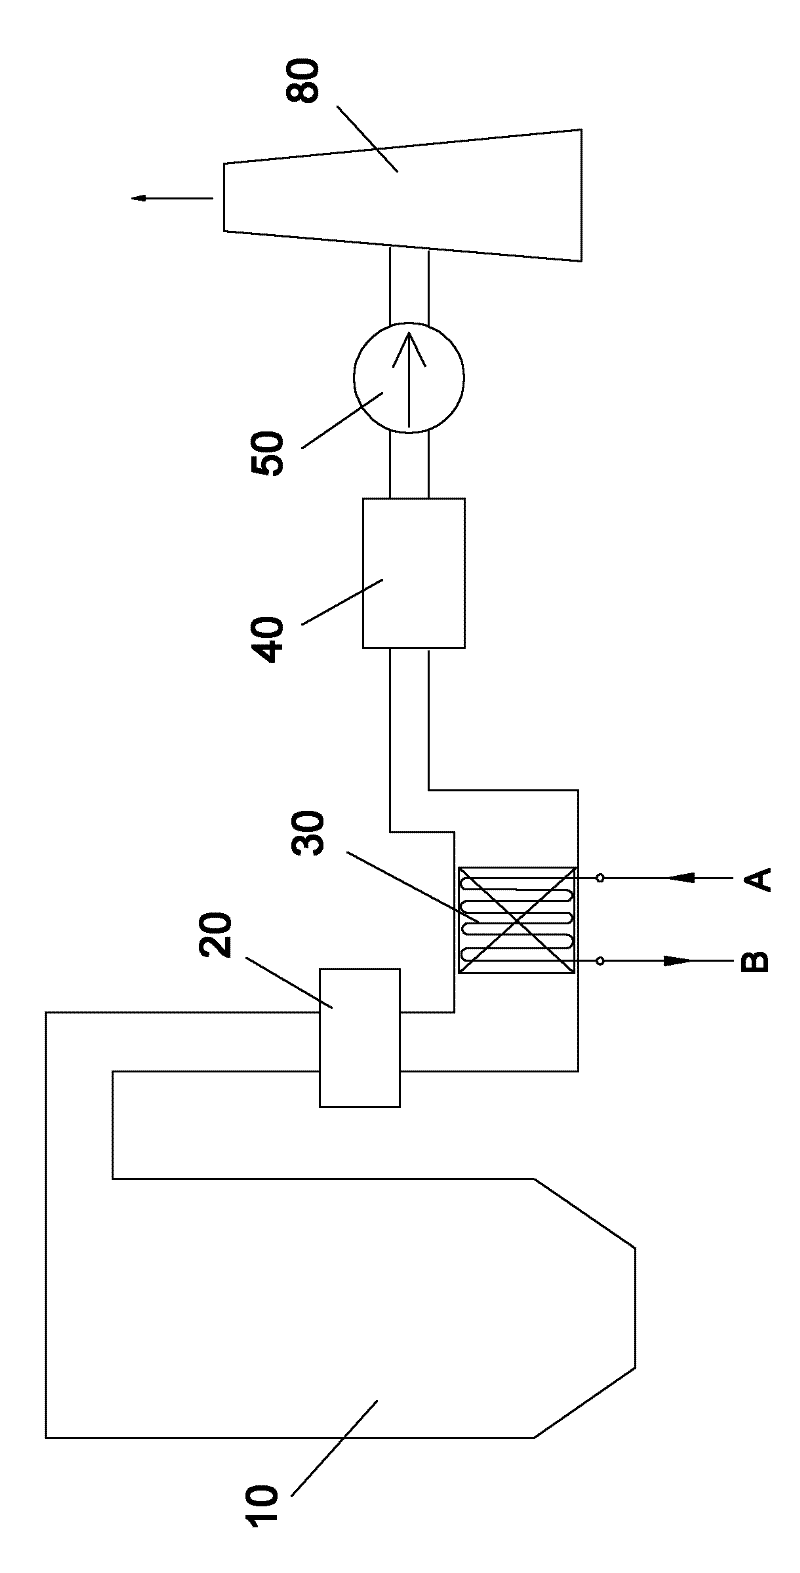 Step recycling method and device of boiler flue gas waste heat